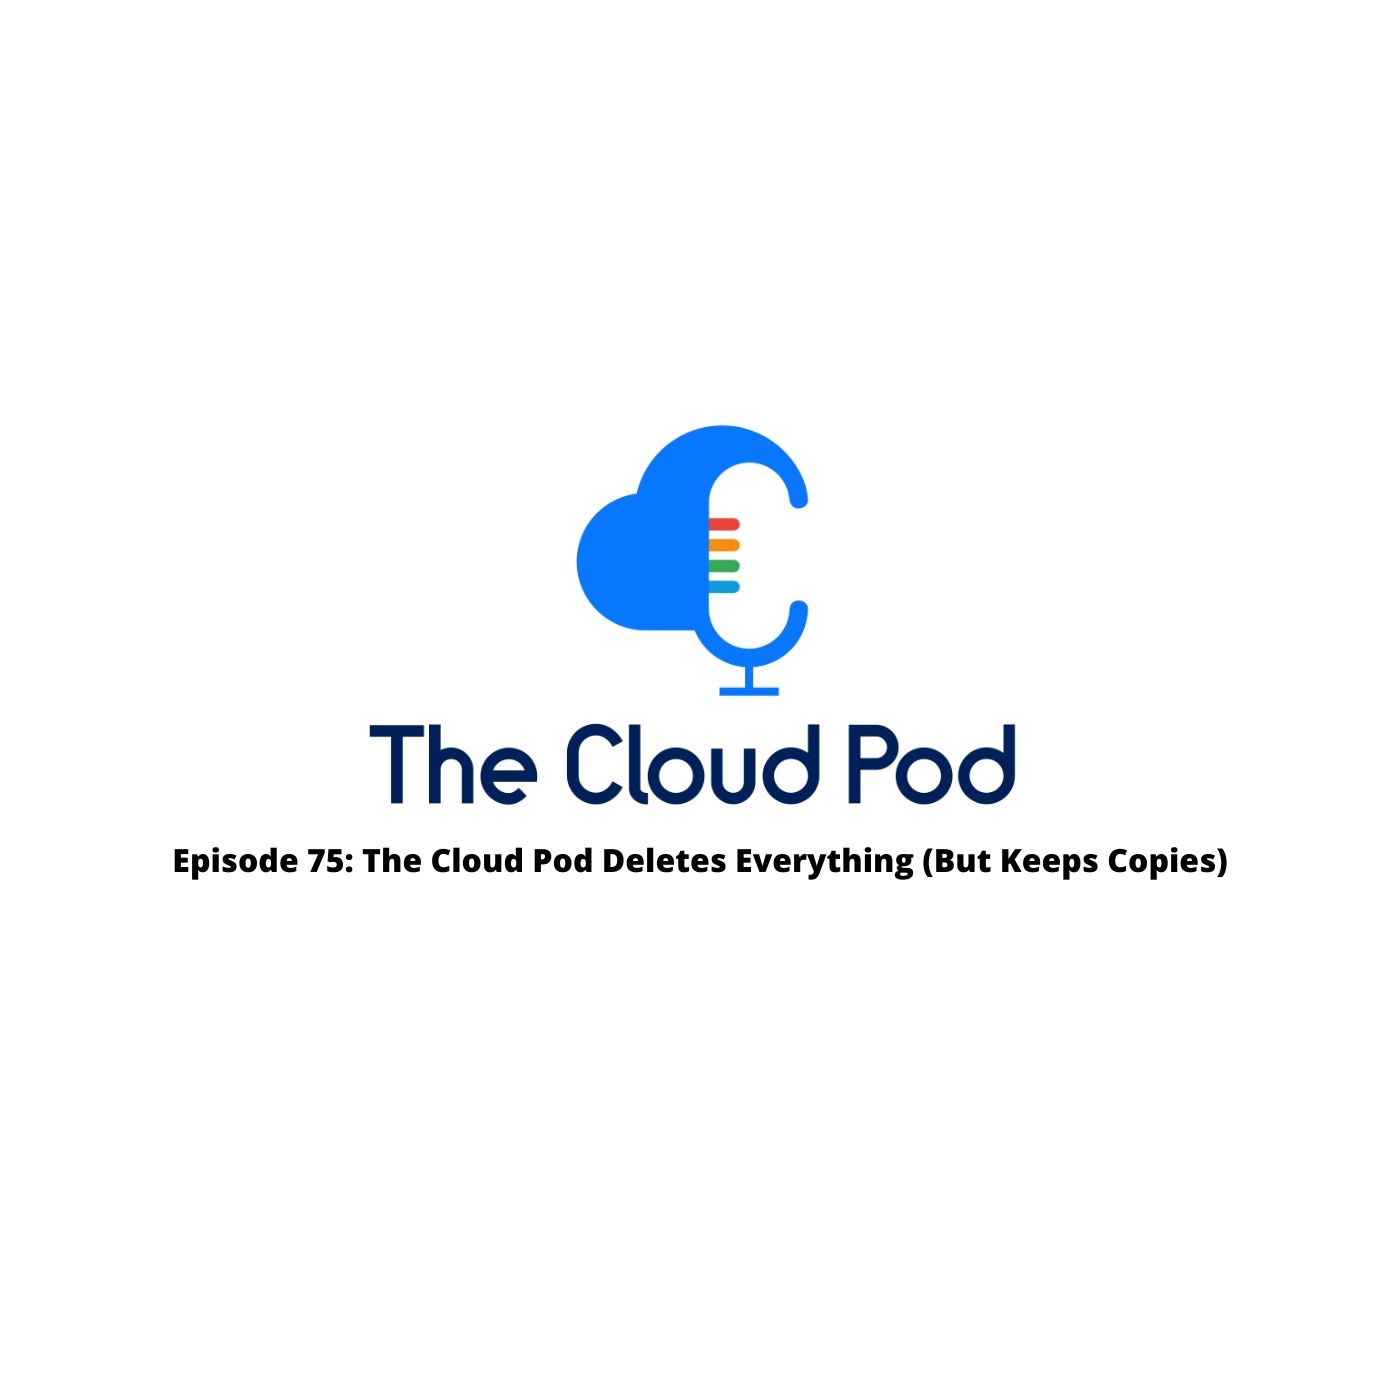 Episode 75: The Cloud Pod Deletes Everything (But Keeps Copies)